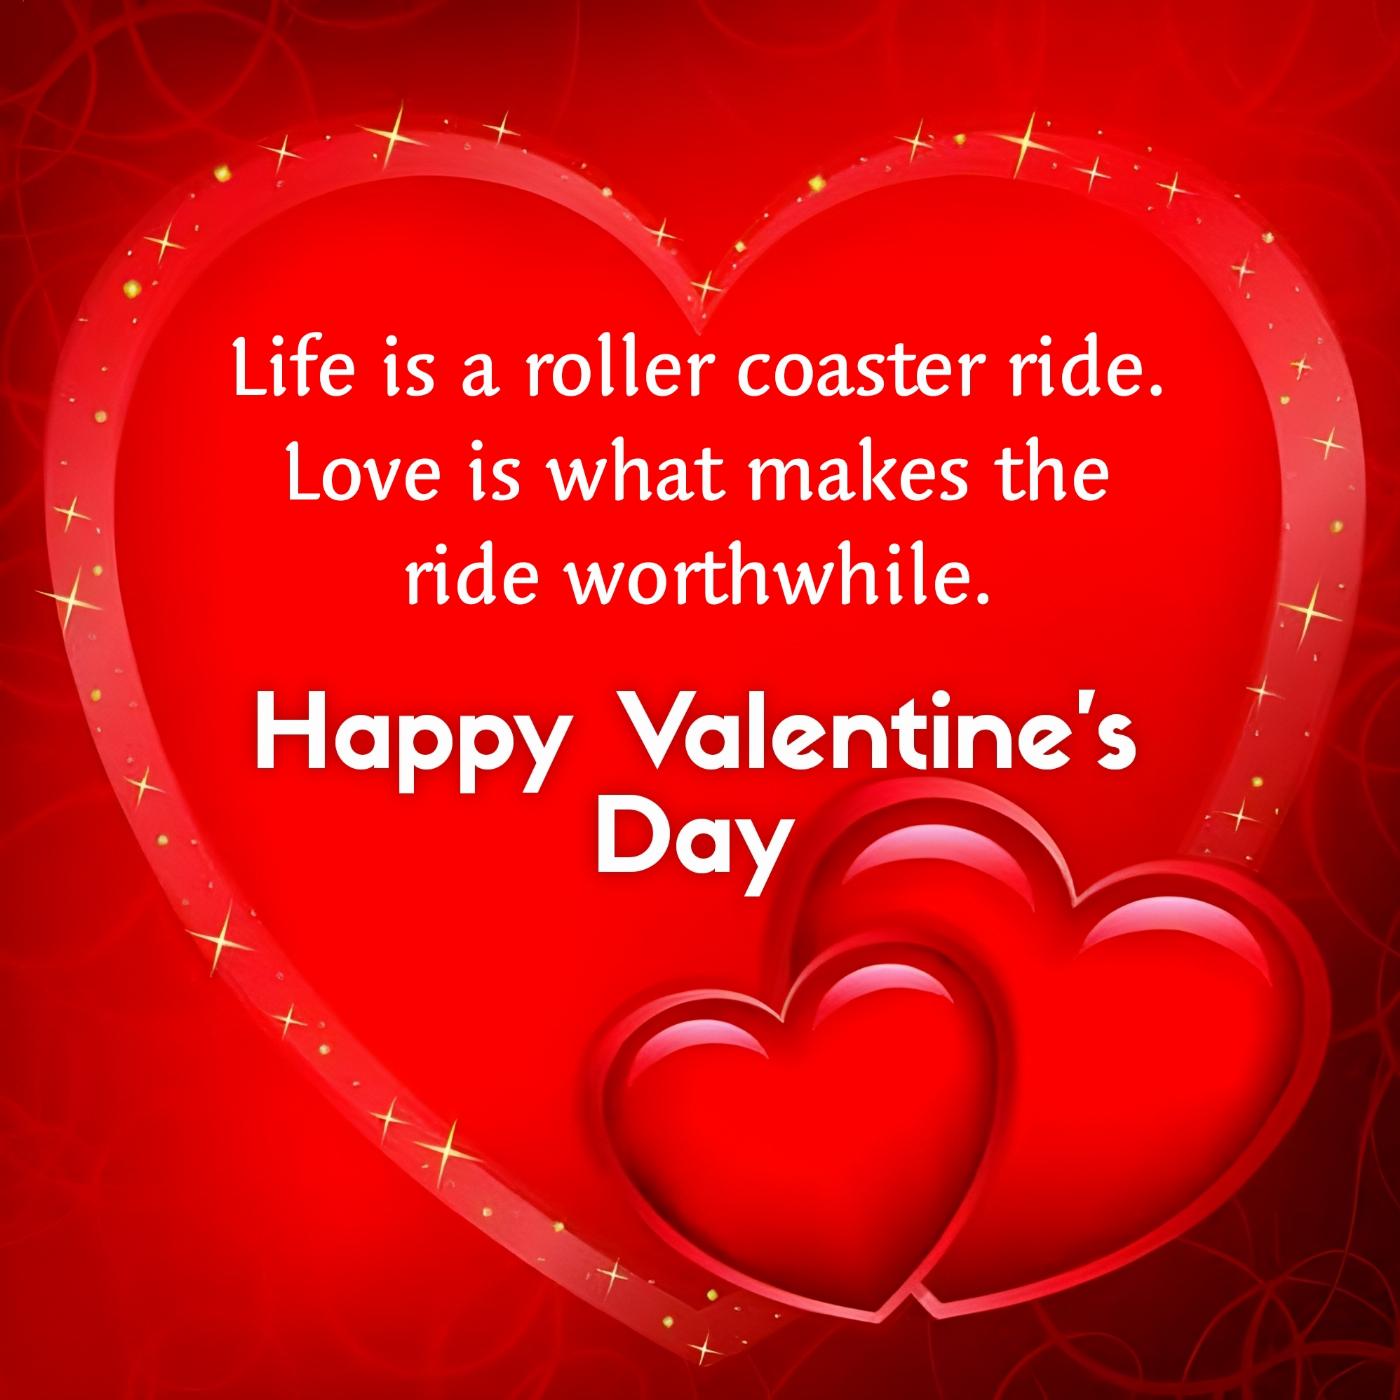 Life is a roller coaster ride Love is what makes the ride worthwhile